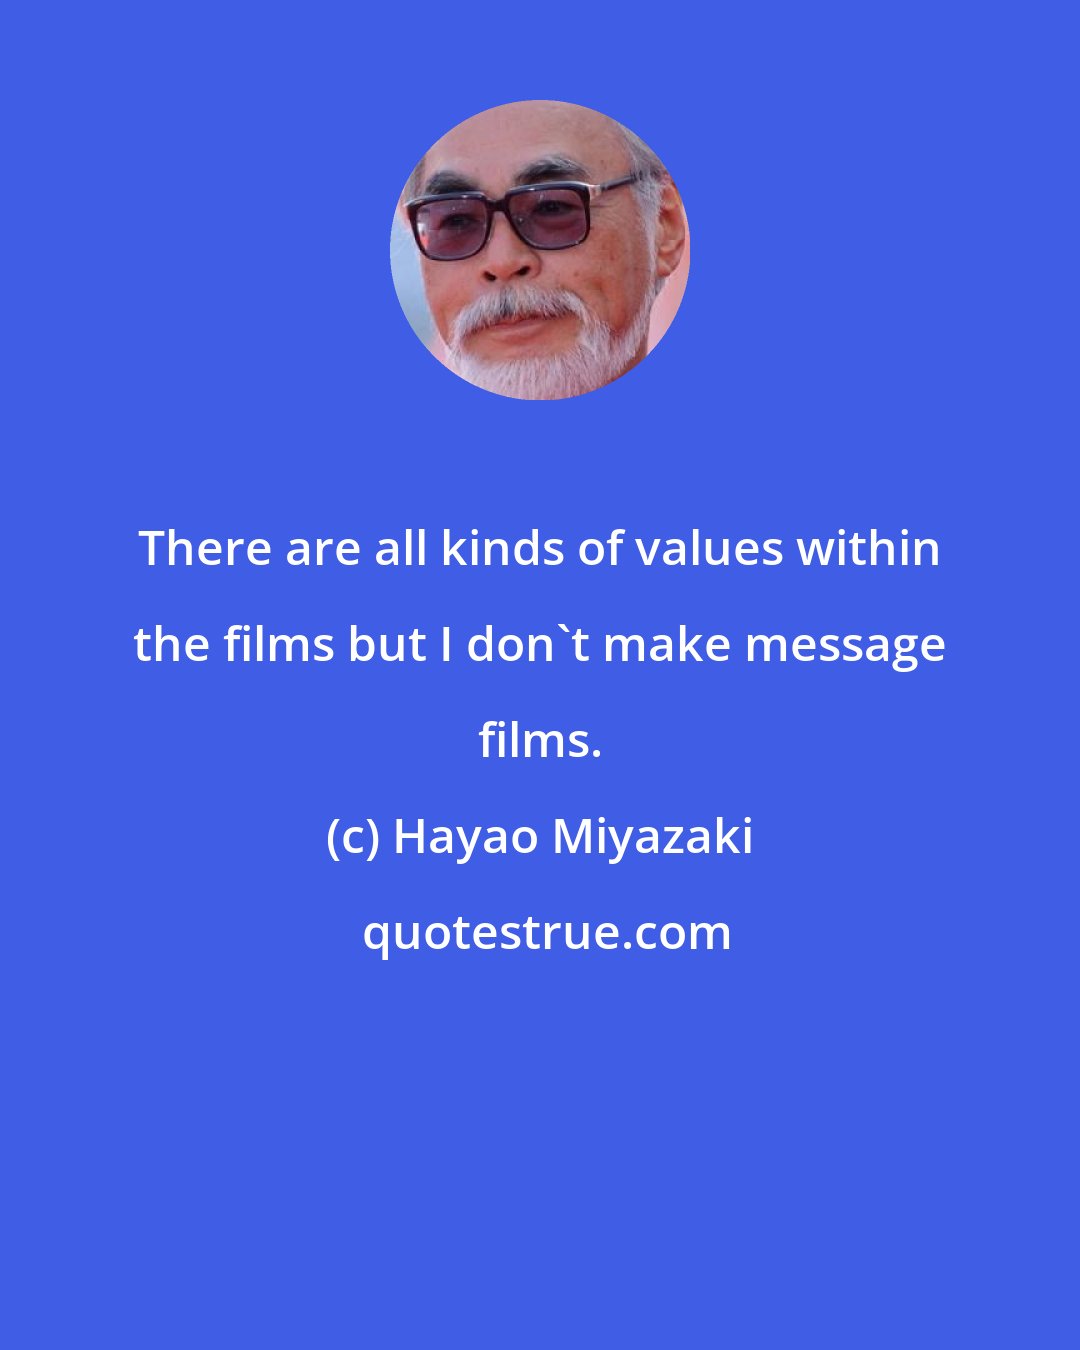 Hayao Miyazaki: There are all kinds of values within the films but I don't make message films.